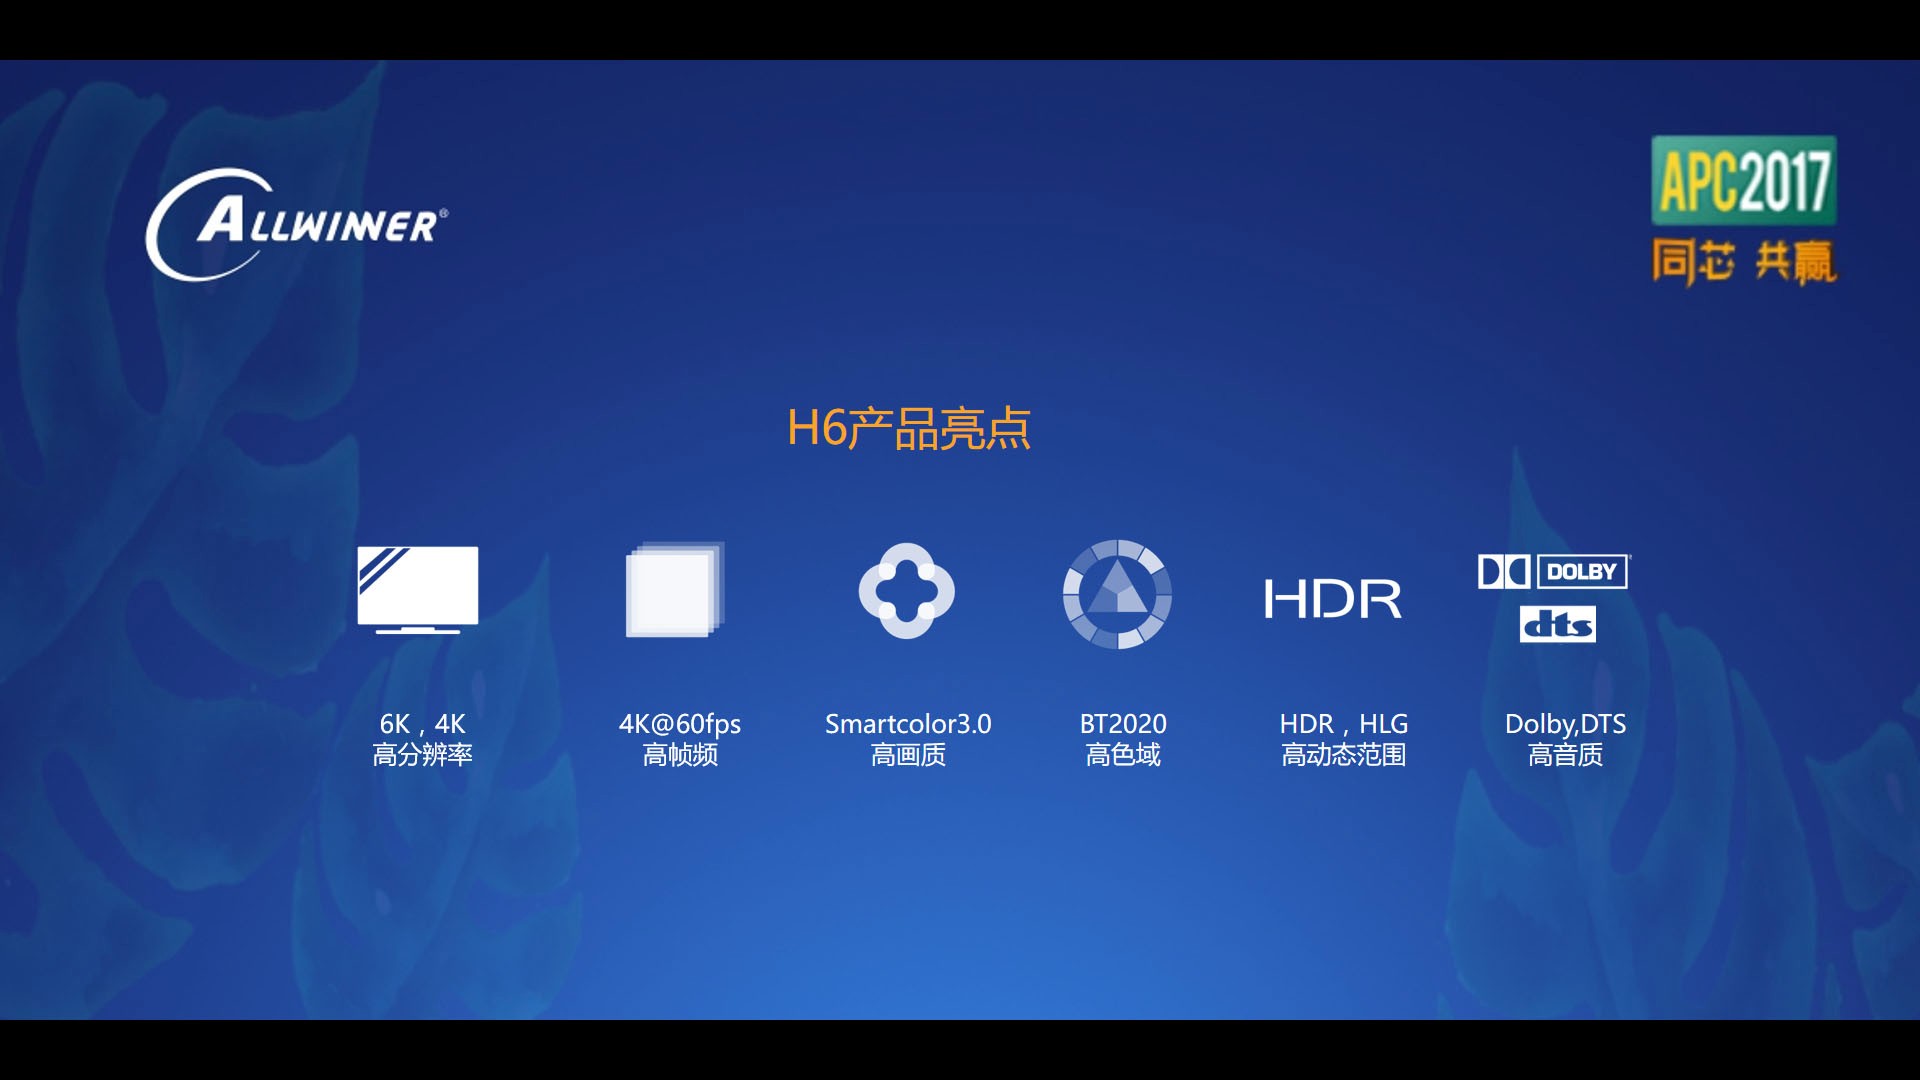 Zhuhai Quanzhi Technology Co., Ltd. officially released the strongest image quality 4K set-top box SoC - H6